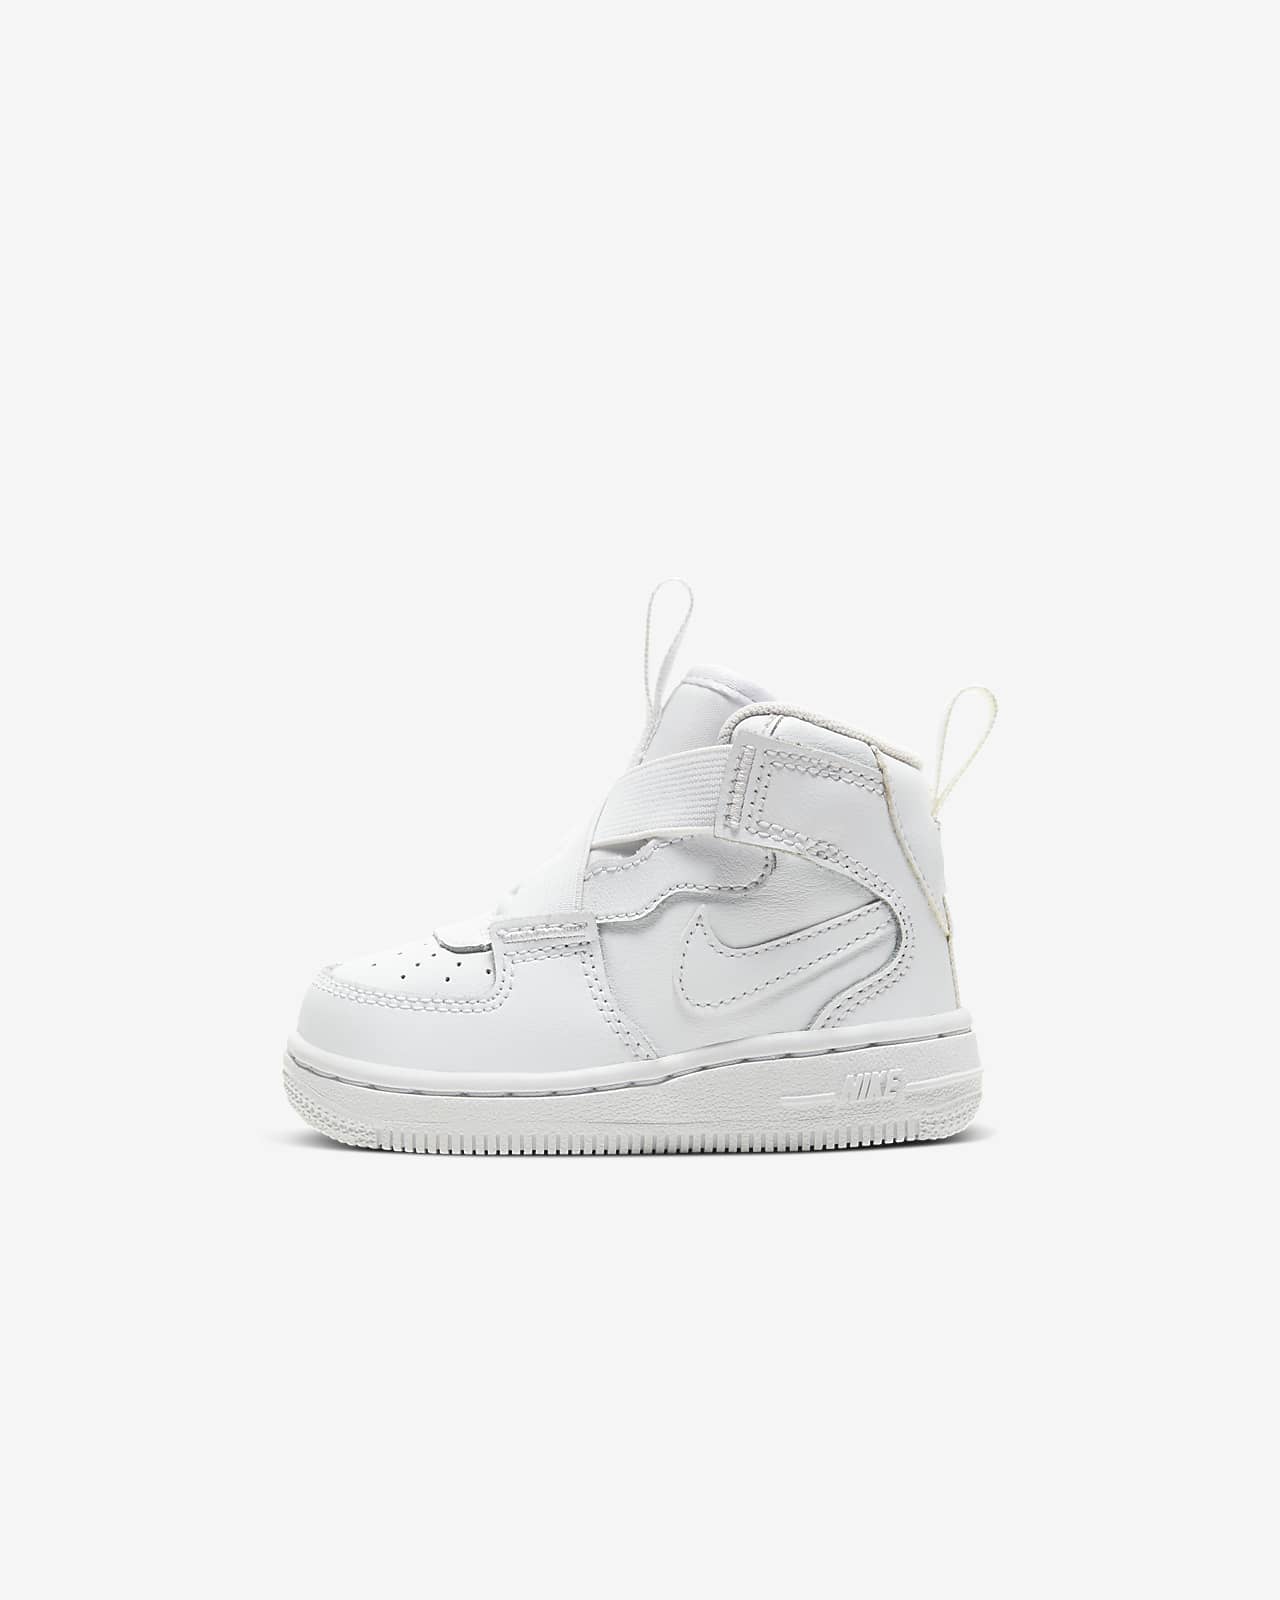 nike force 1 highness